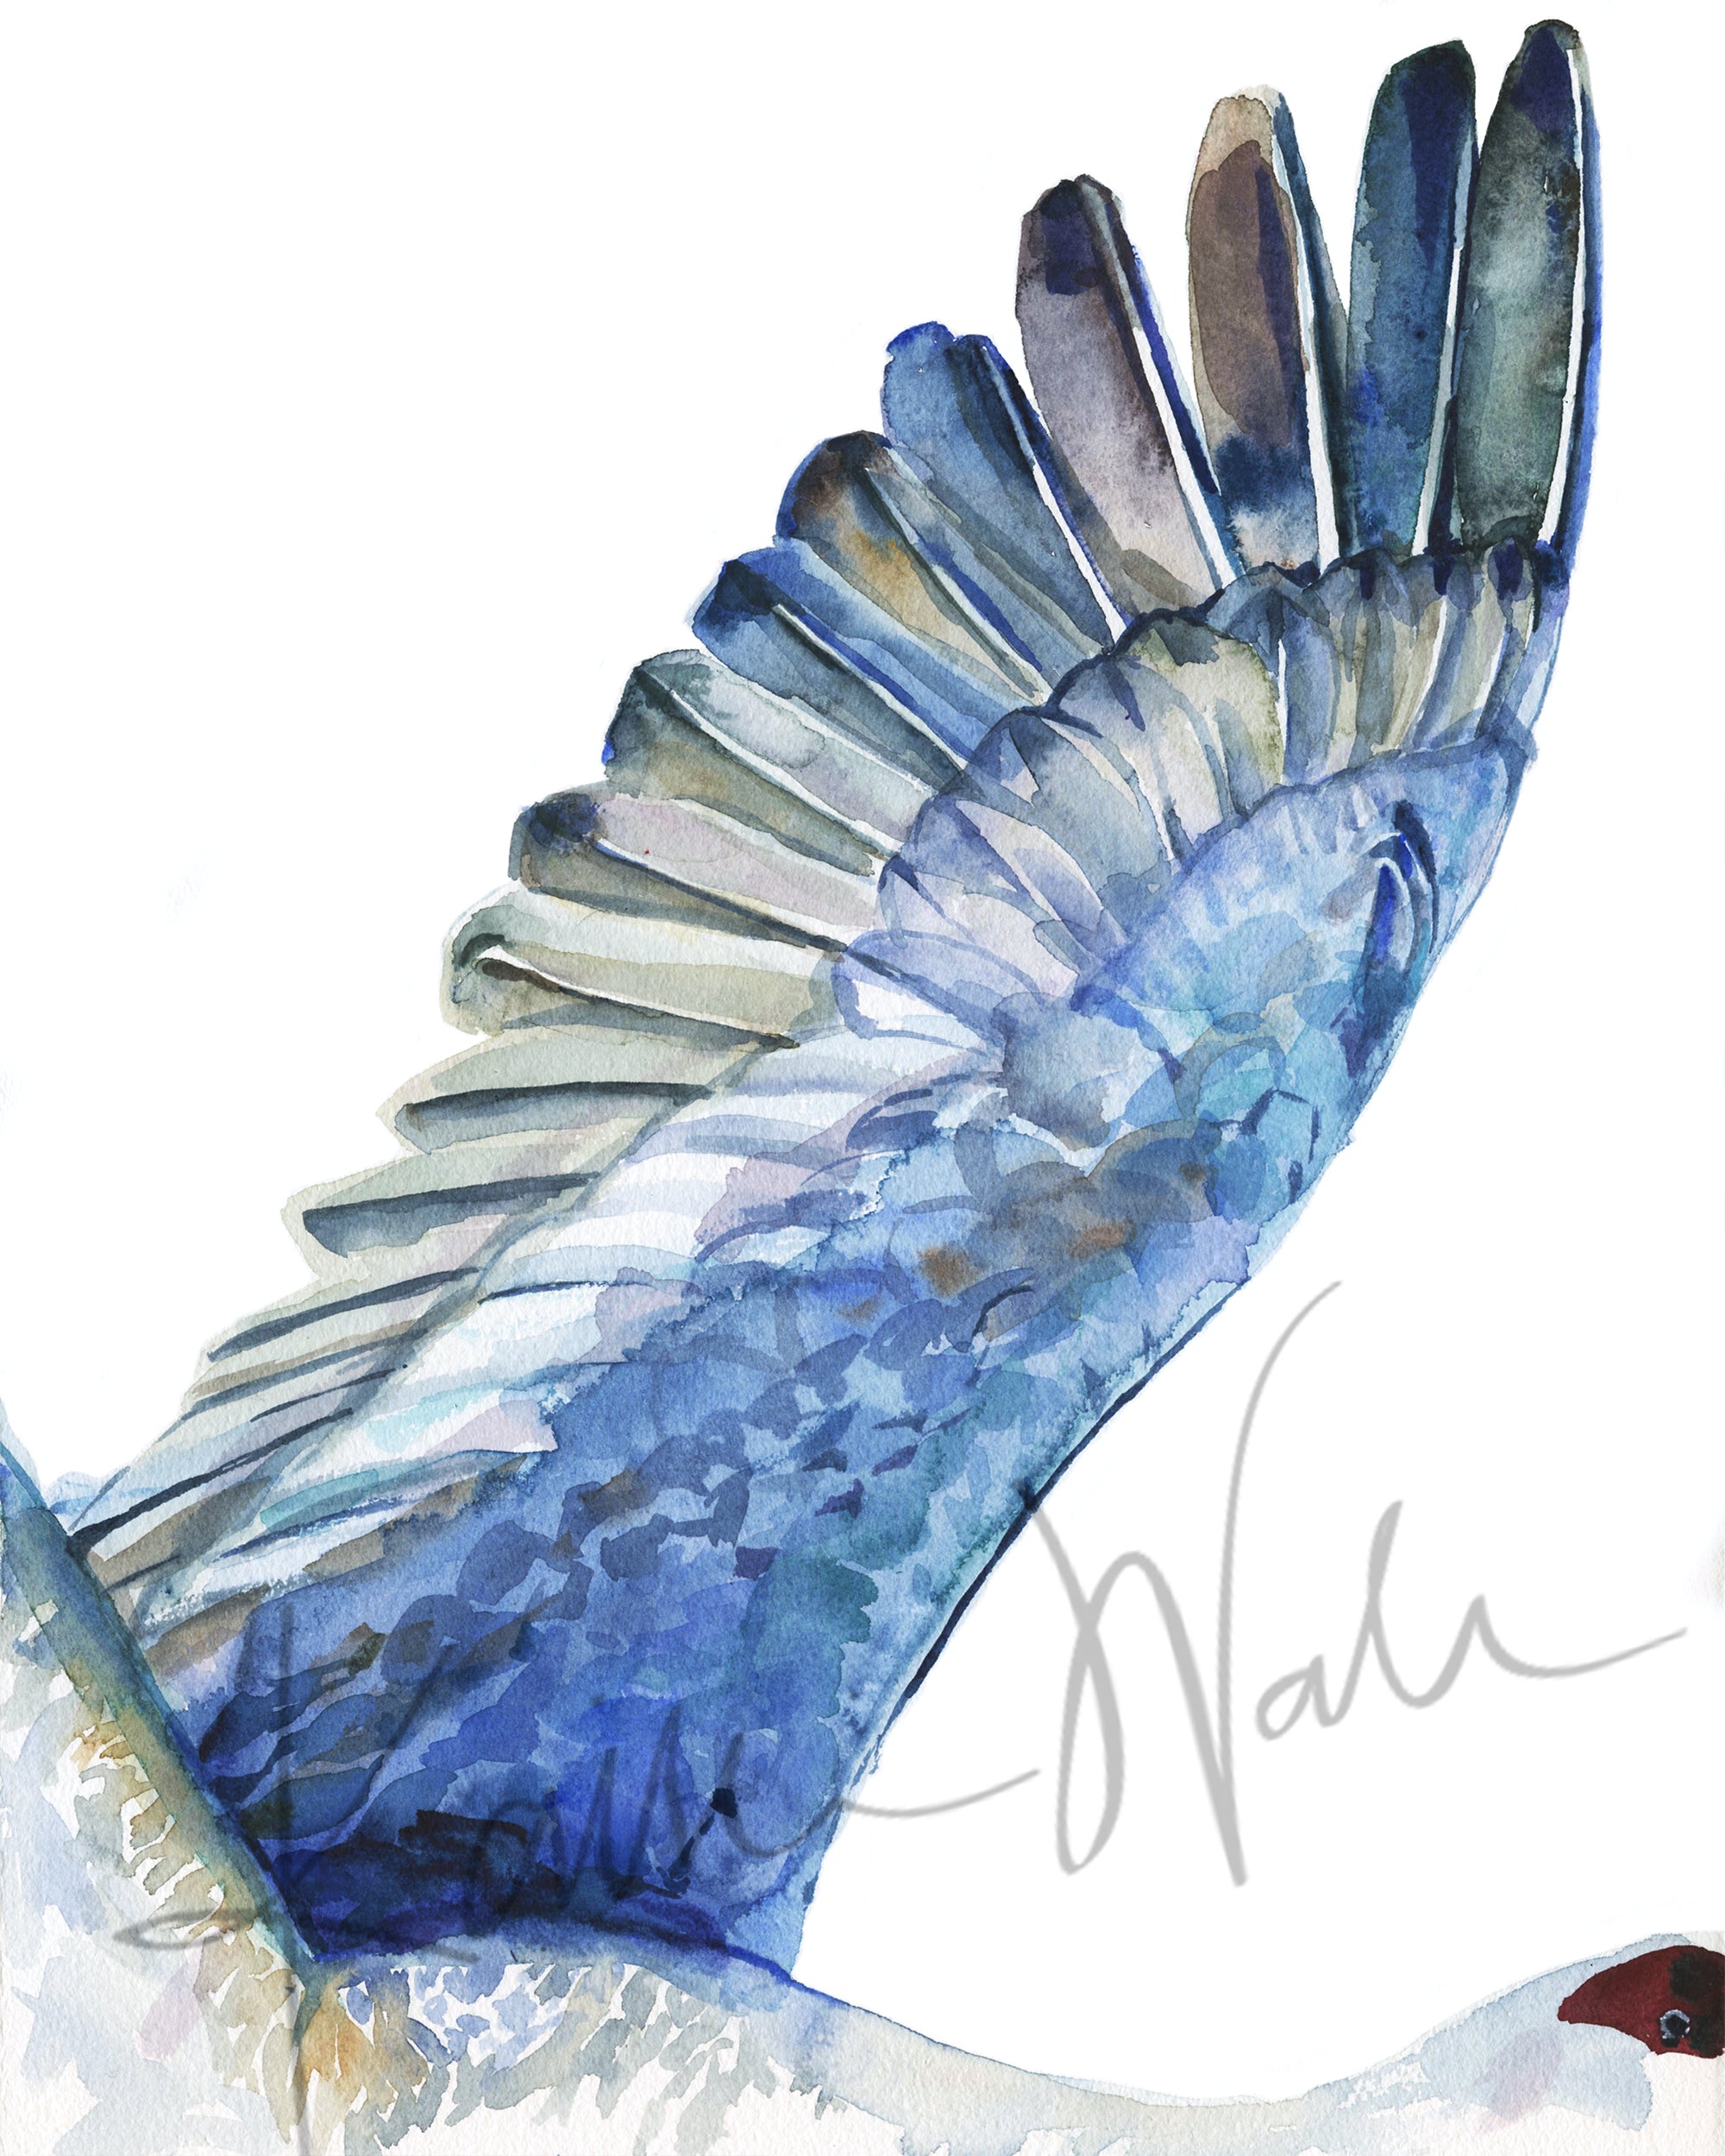 Unframed watercolor diptych of a crane's wing with blue feathers. 